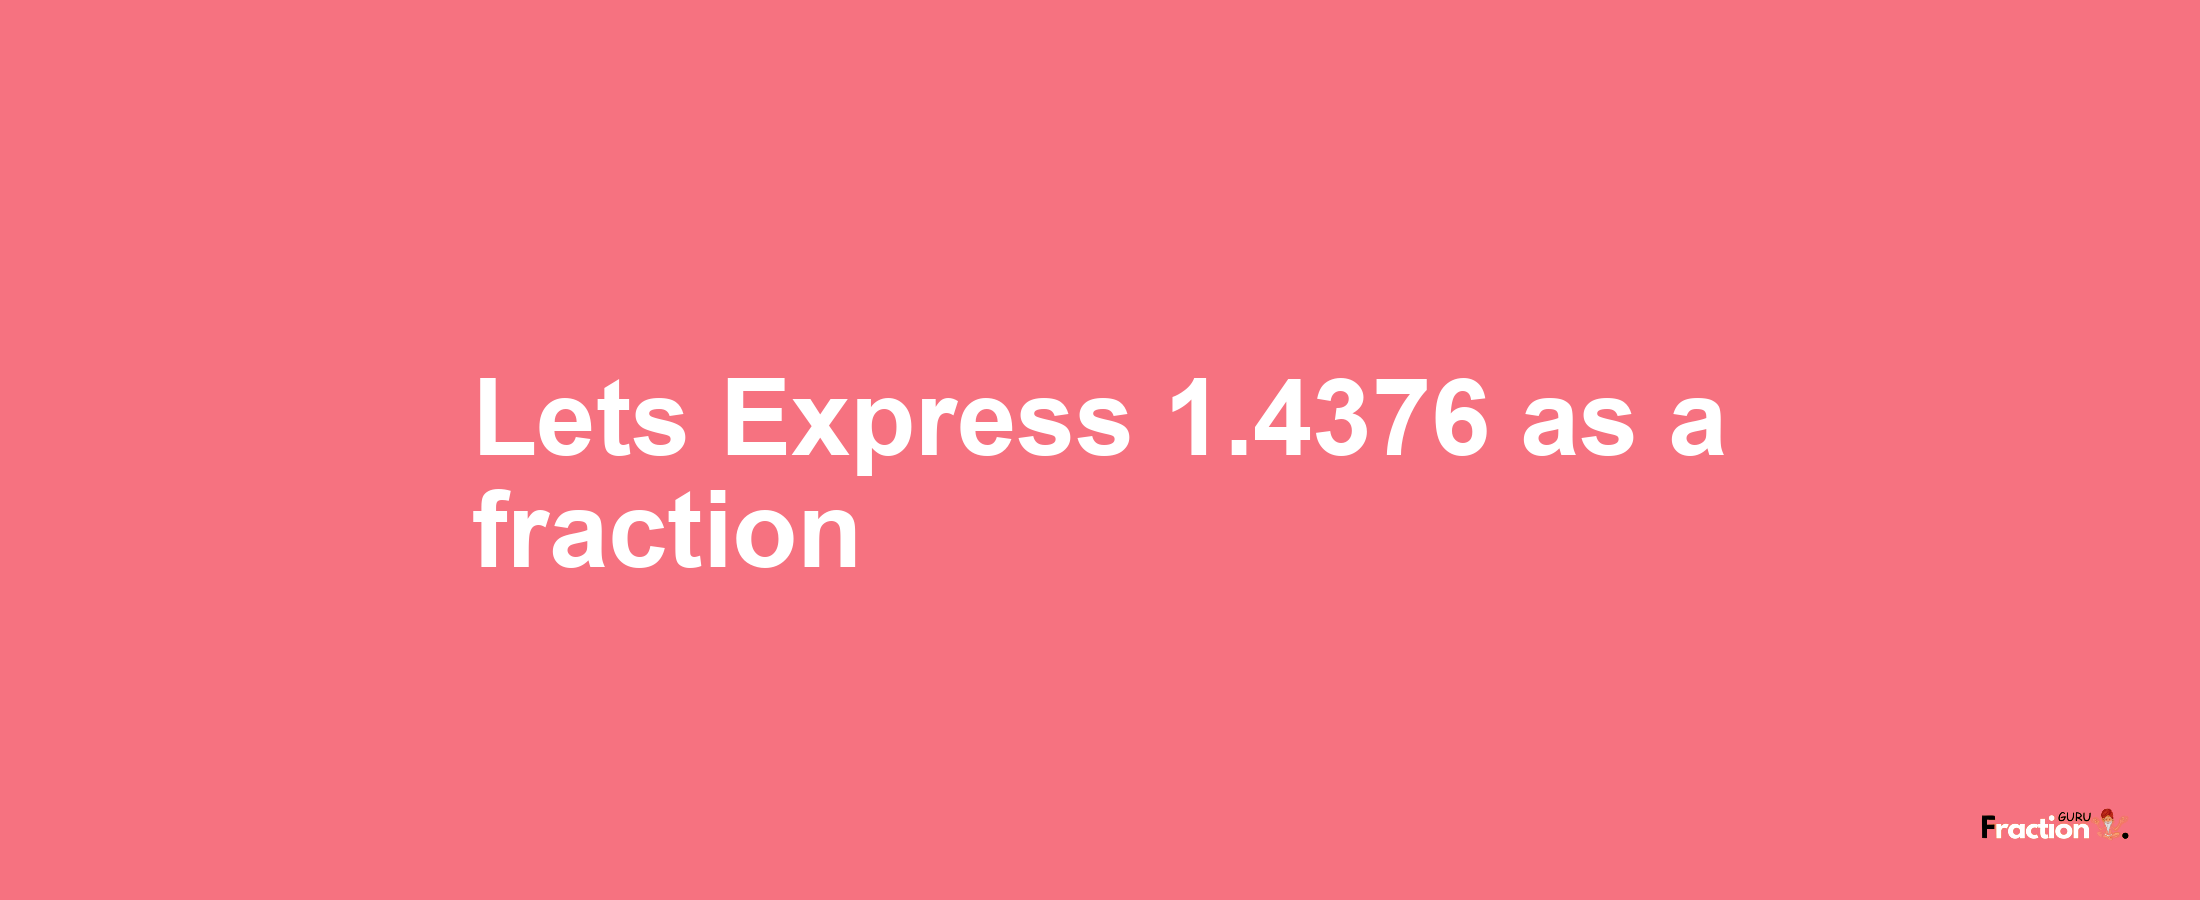 Lets Express 1.4376 as afraction